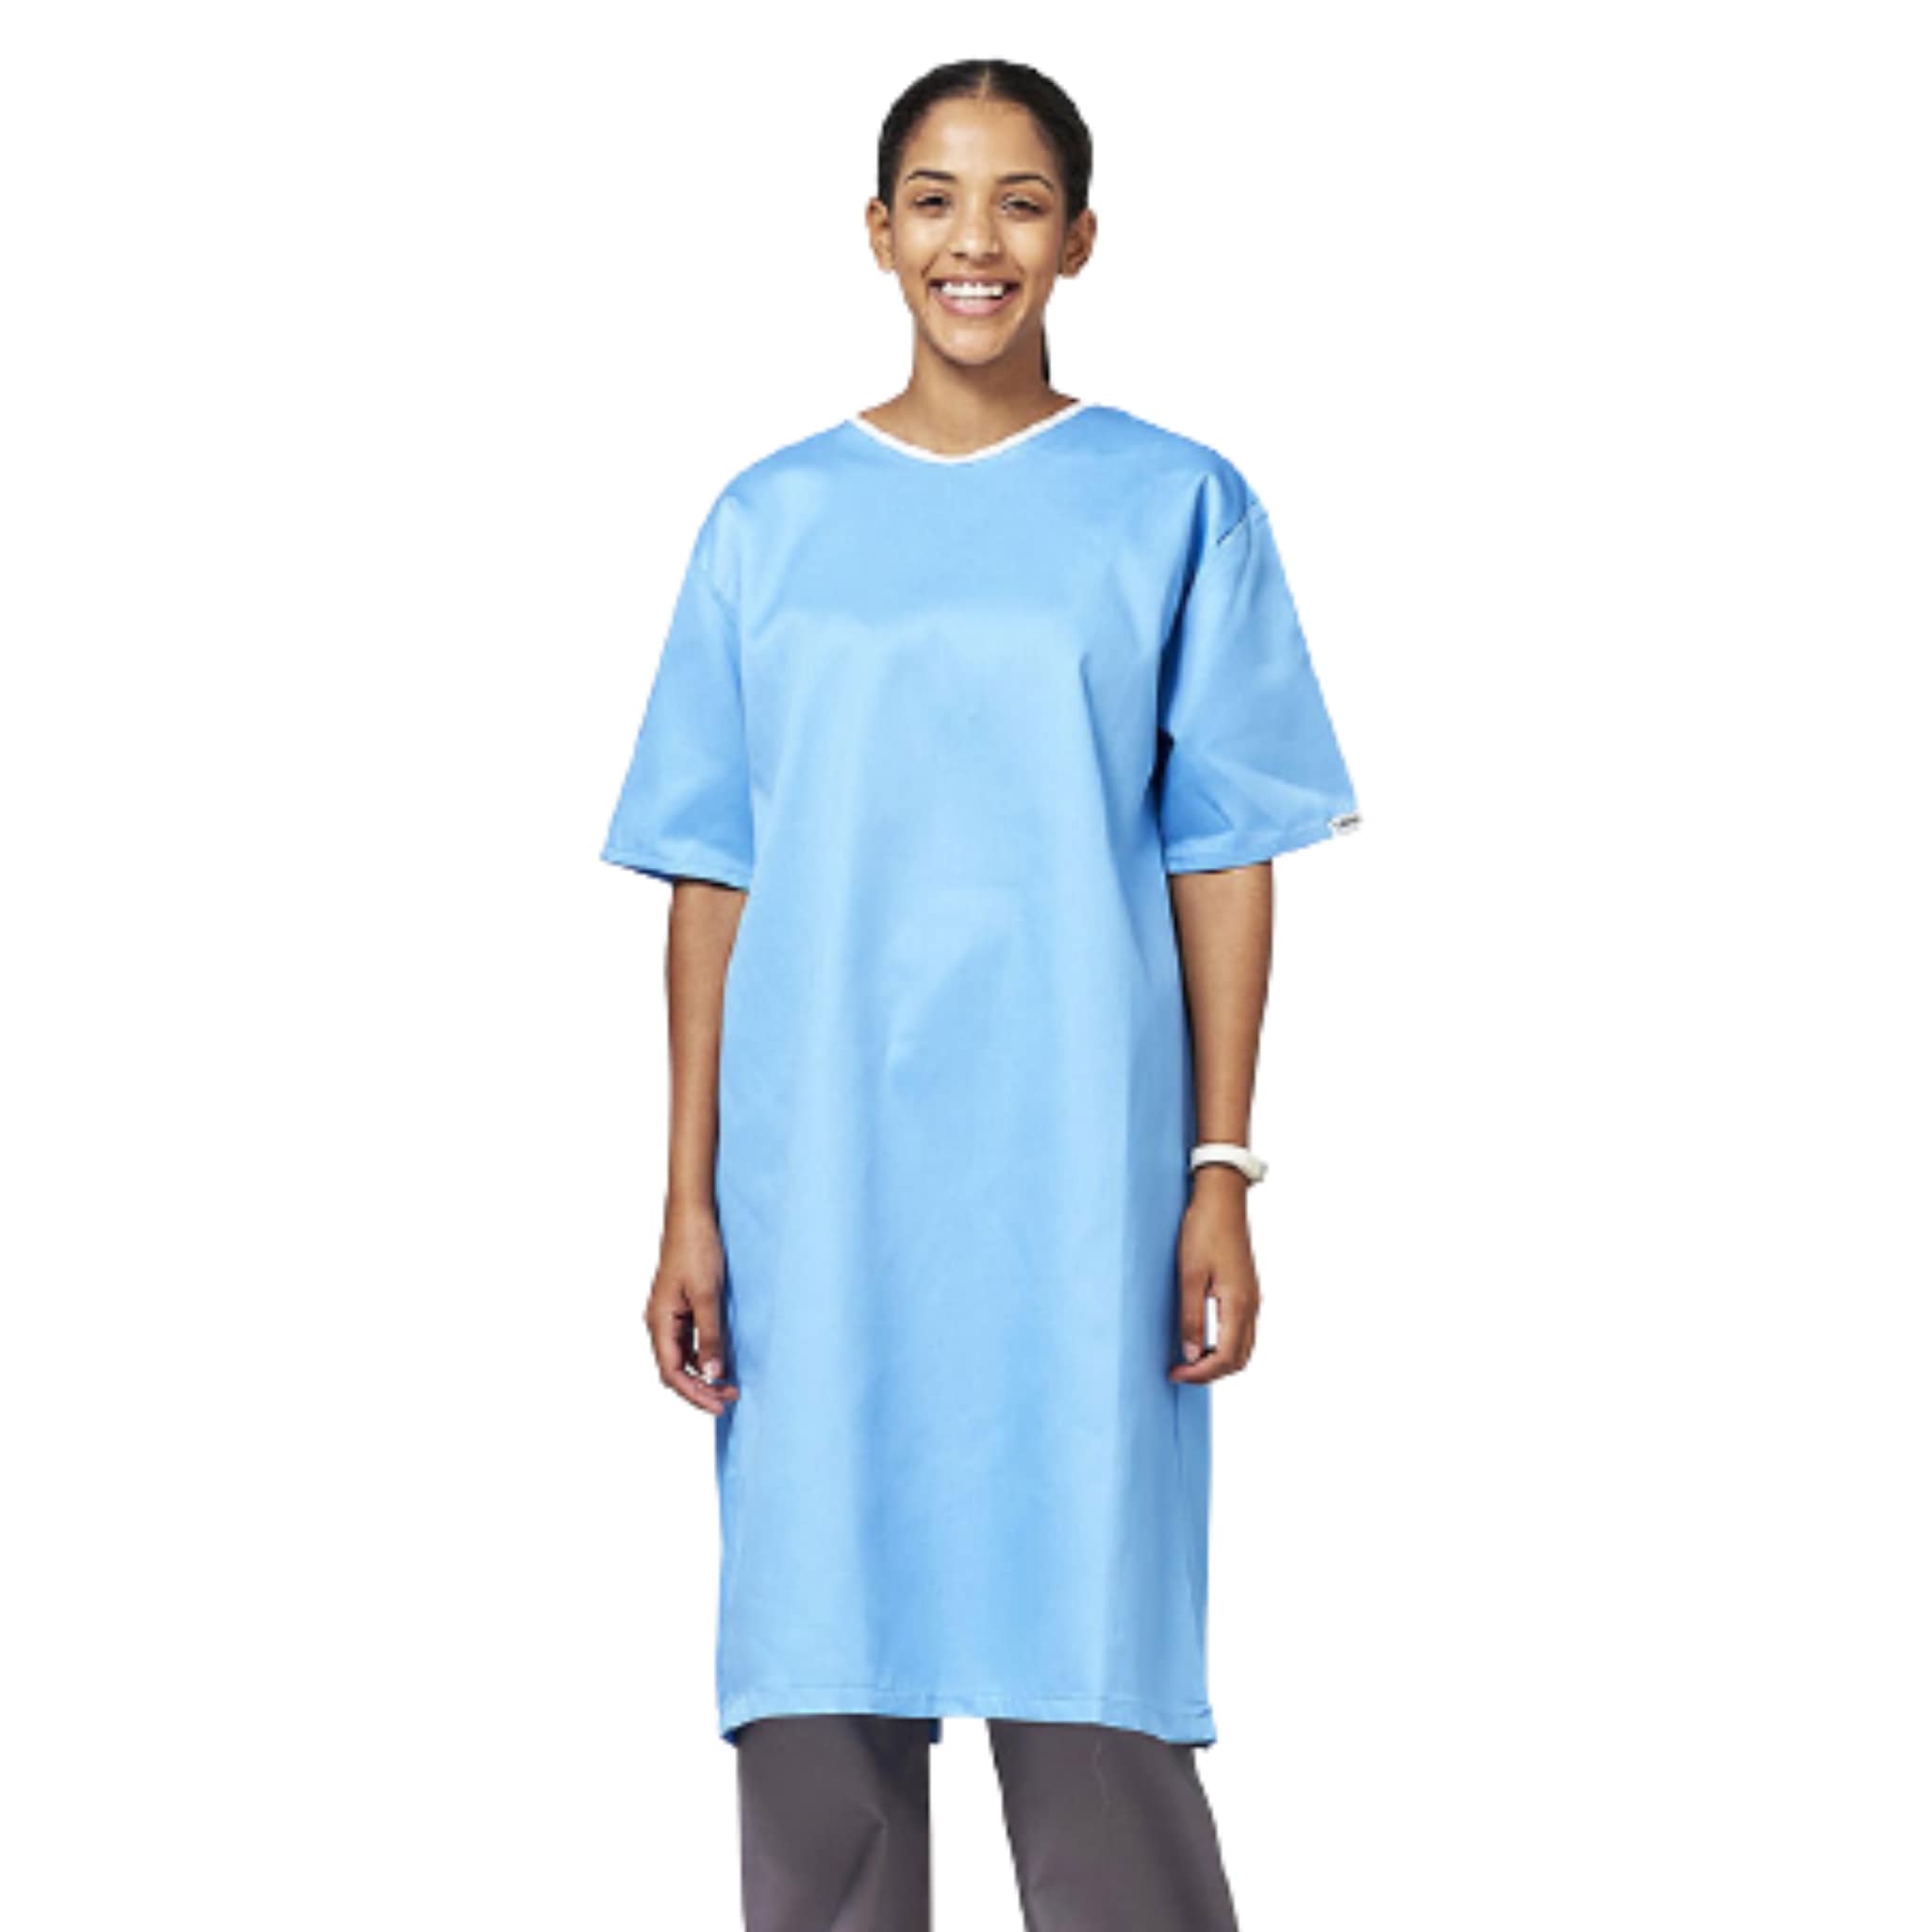 Patients Gowns-Hospital Gowns